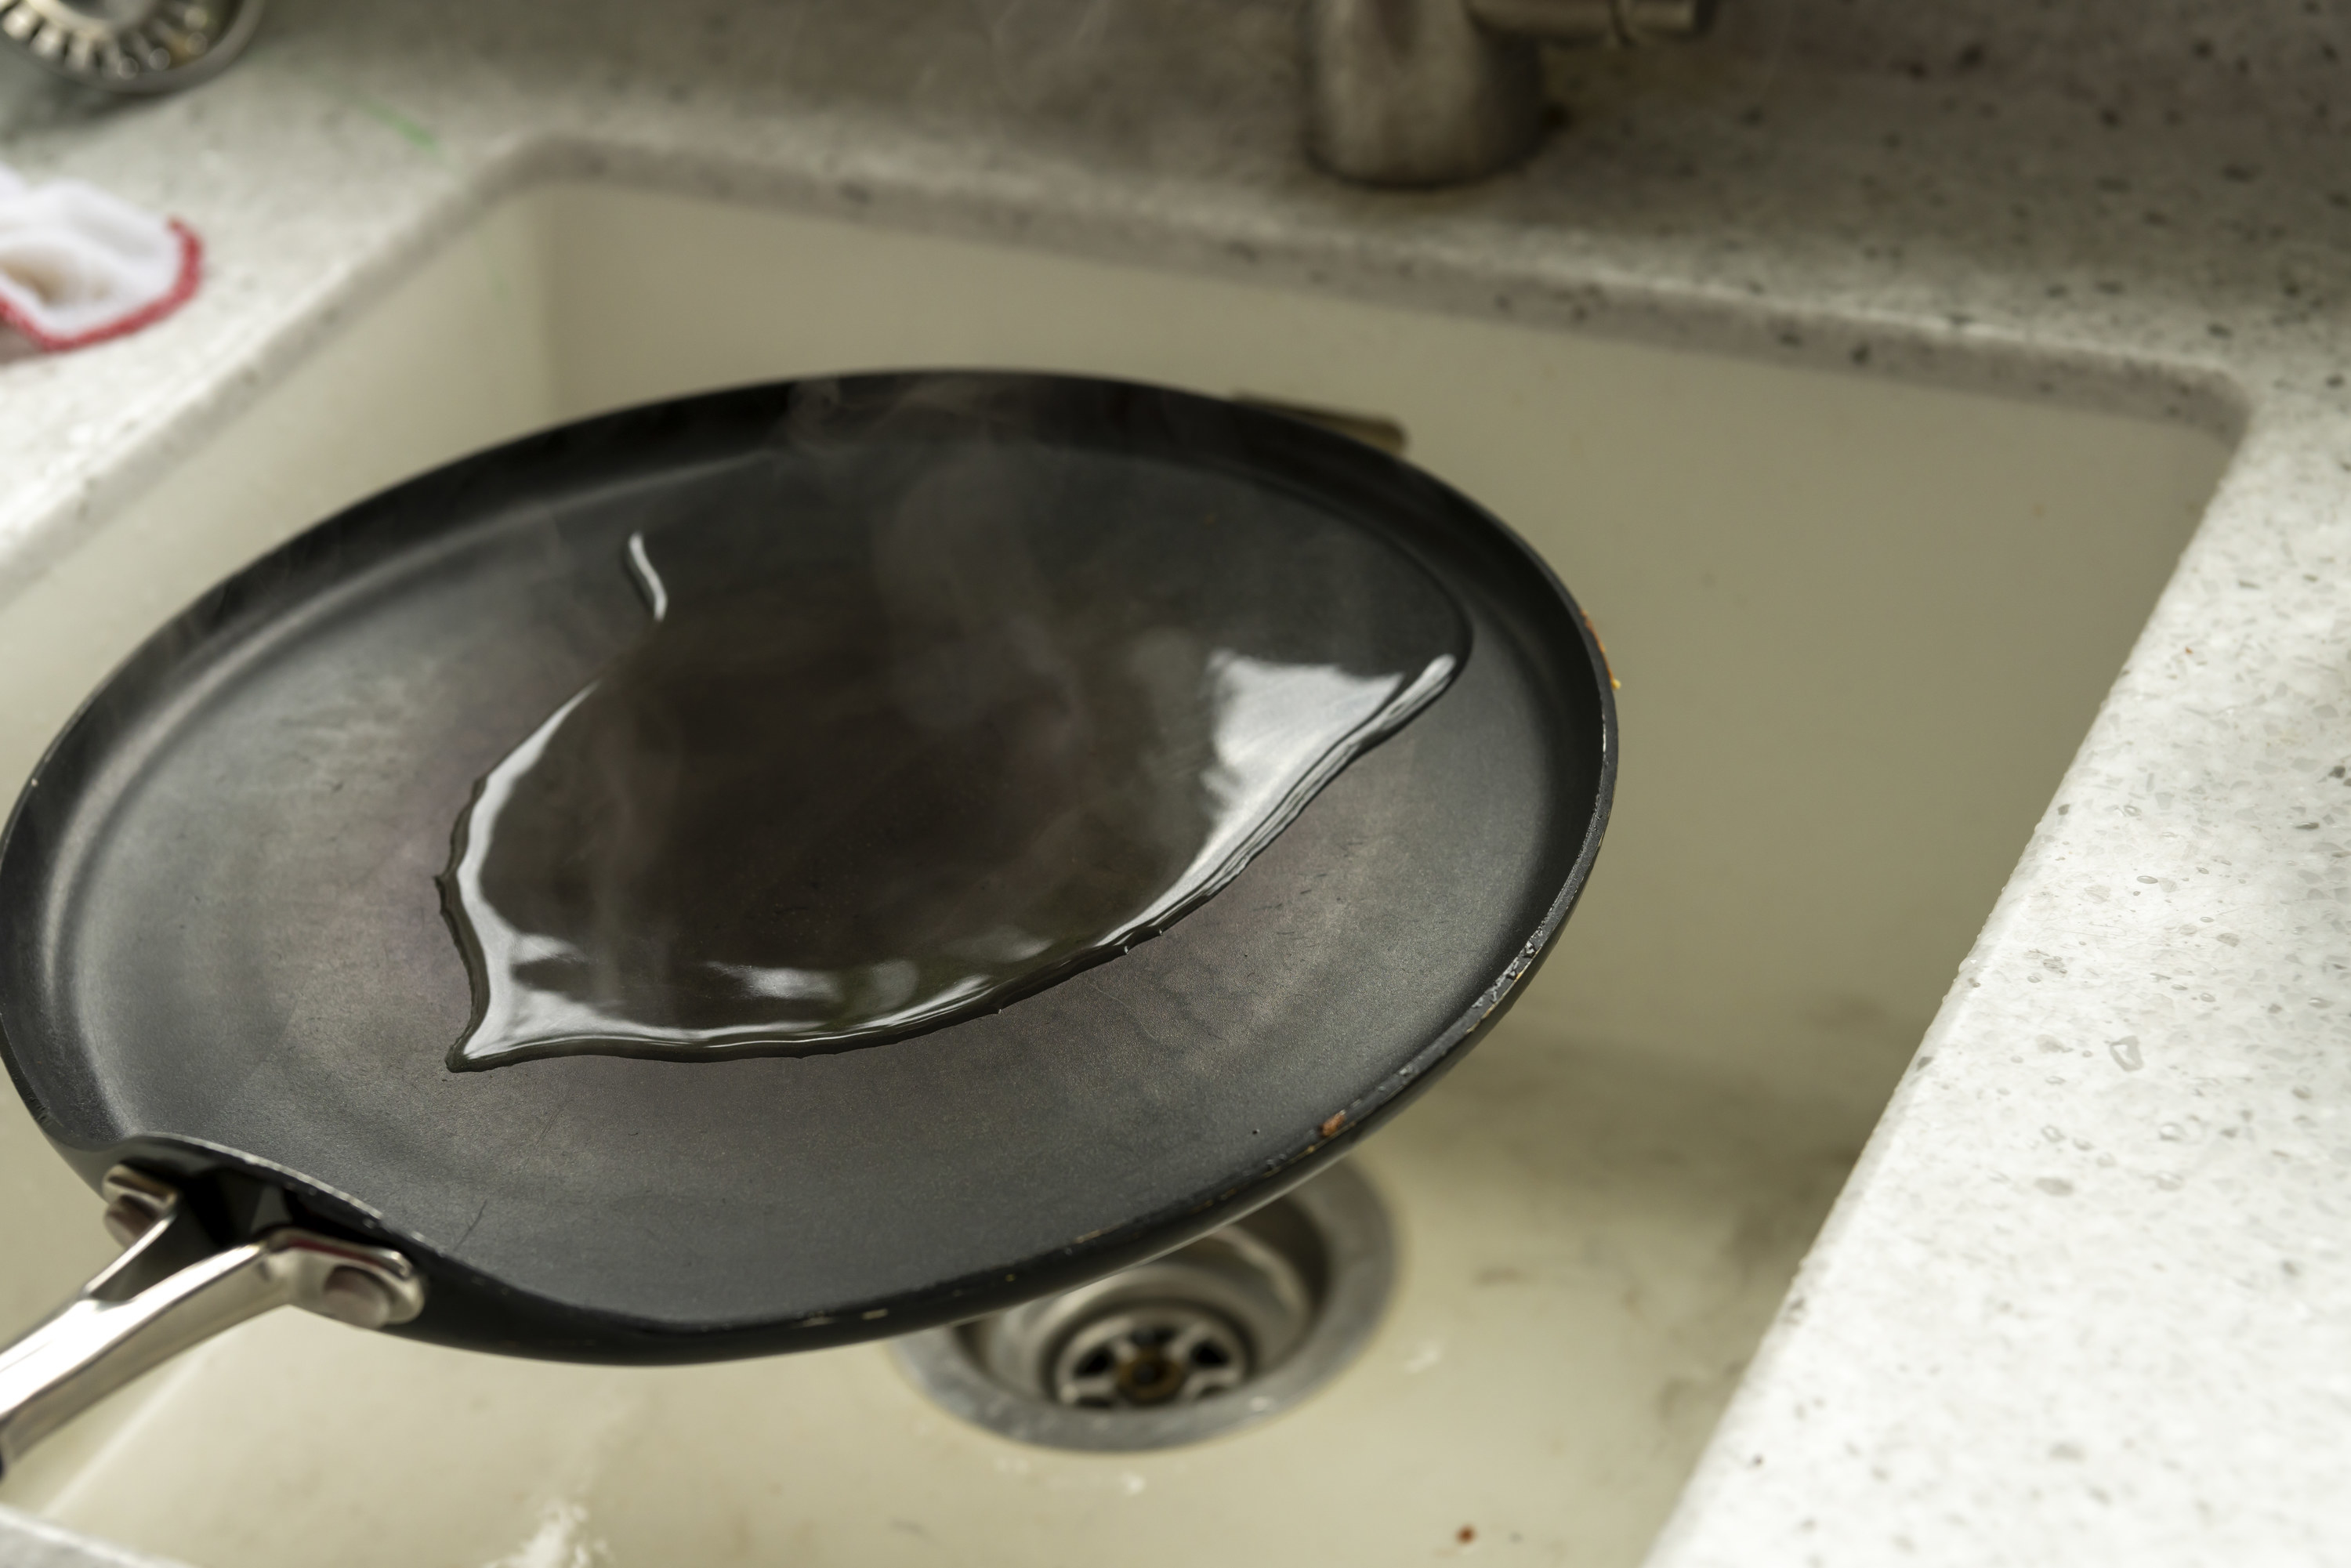 Cast iron skillet with water on it, about to be washed in the sink